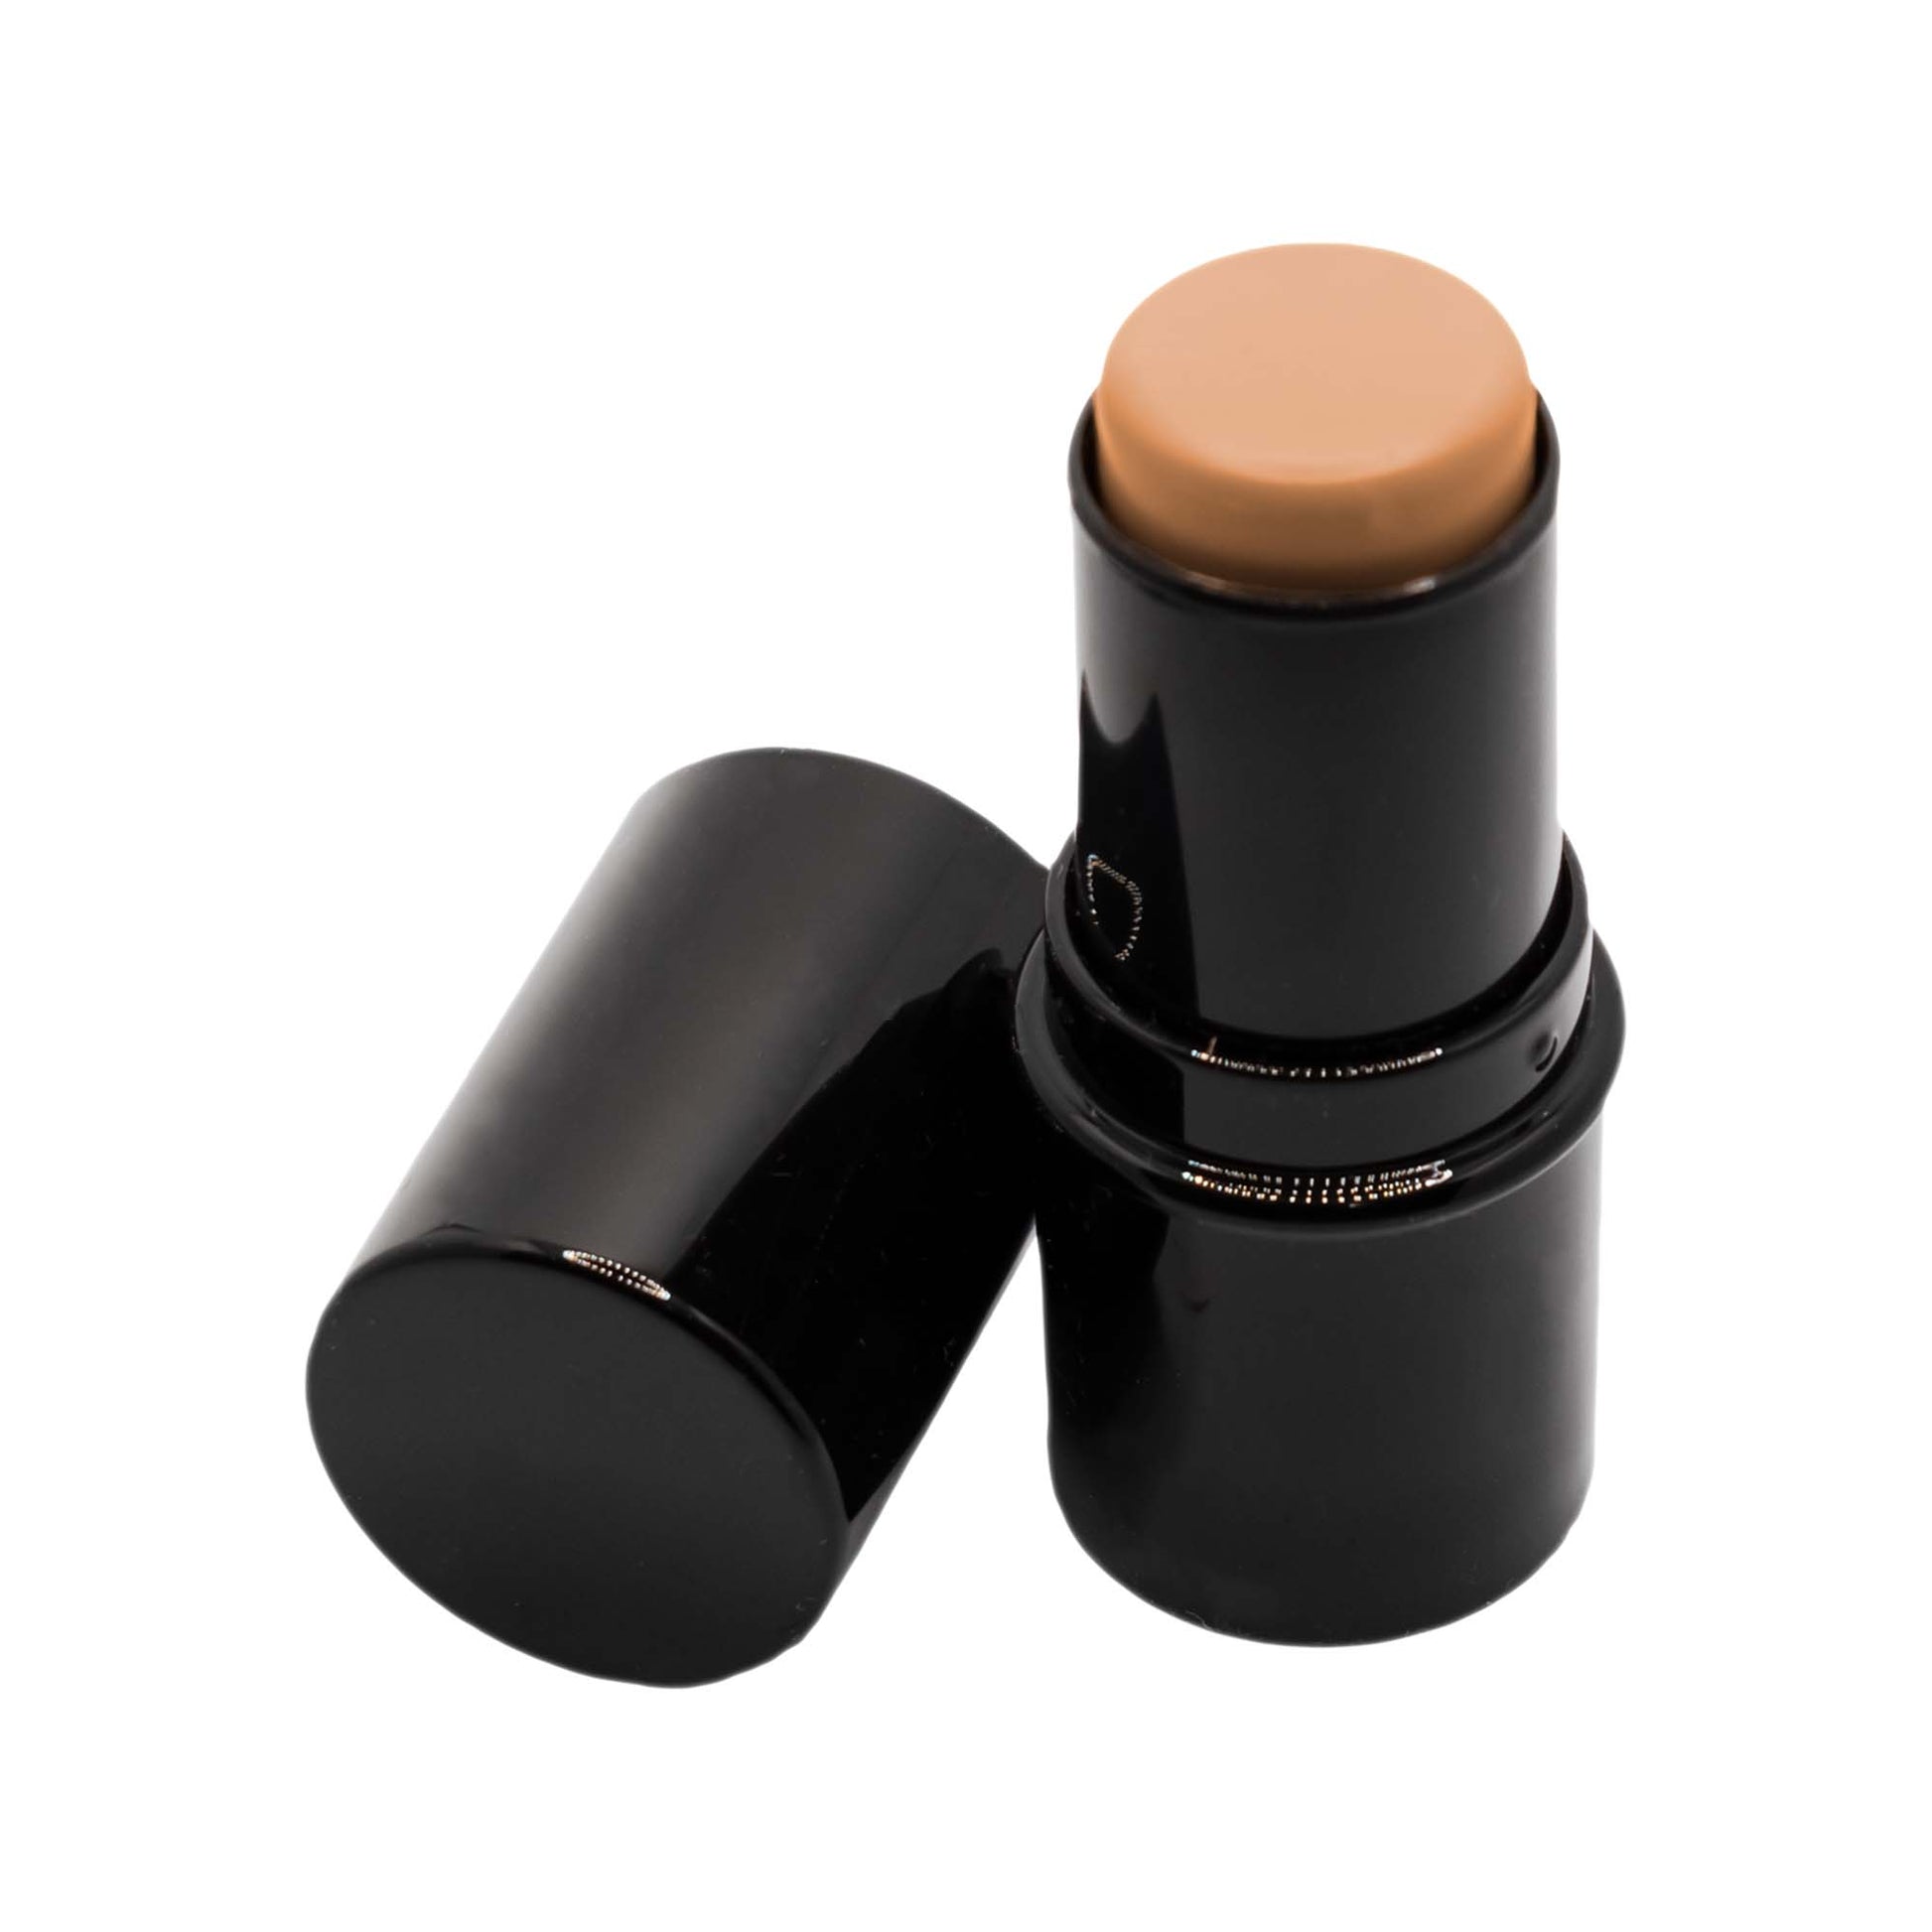 Concealer Stick - Milky Chai - Cactus Cowgirl